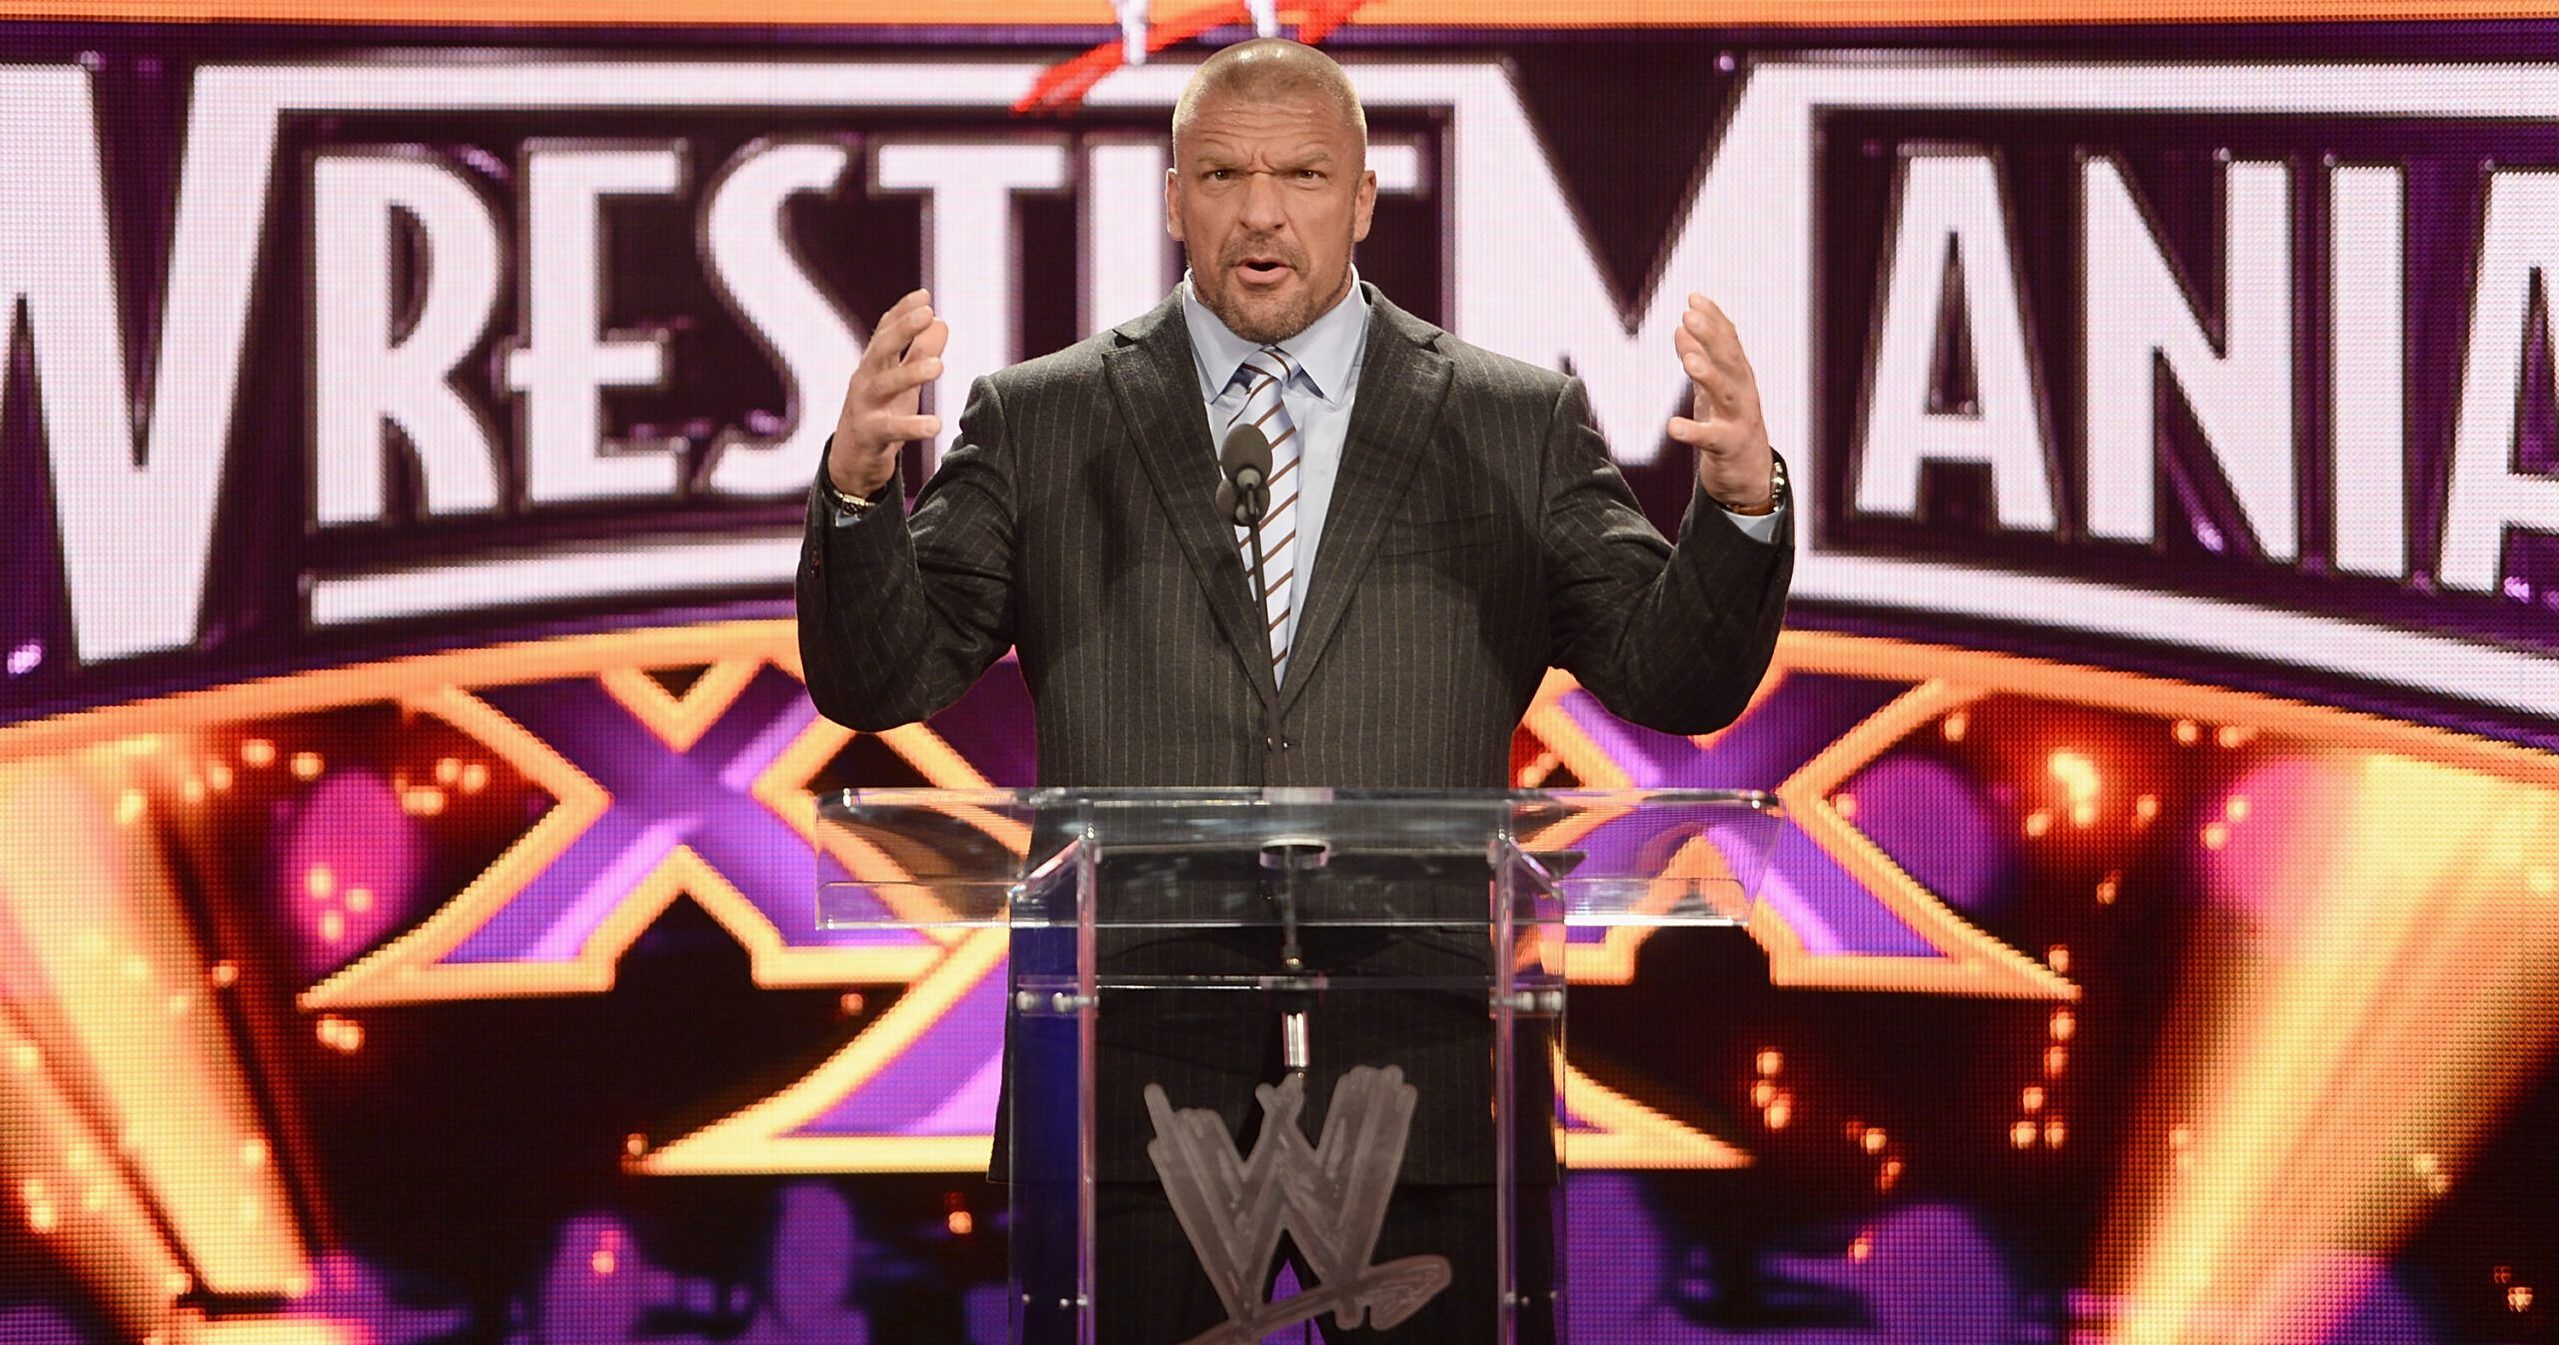 Triple H: 10 things banned in WWE under his stewardship